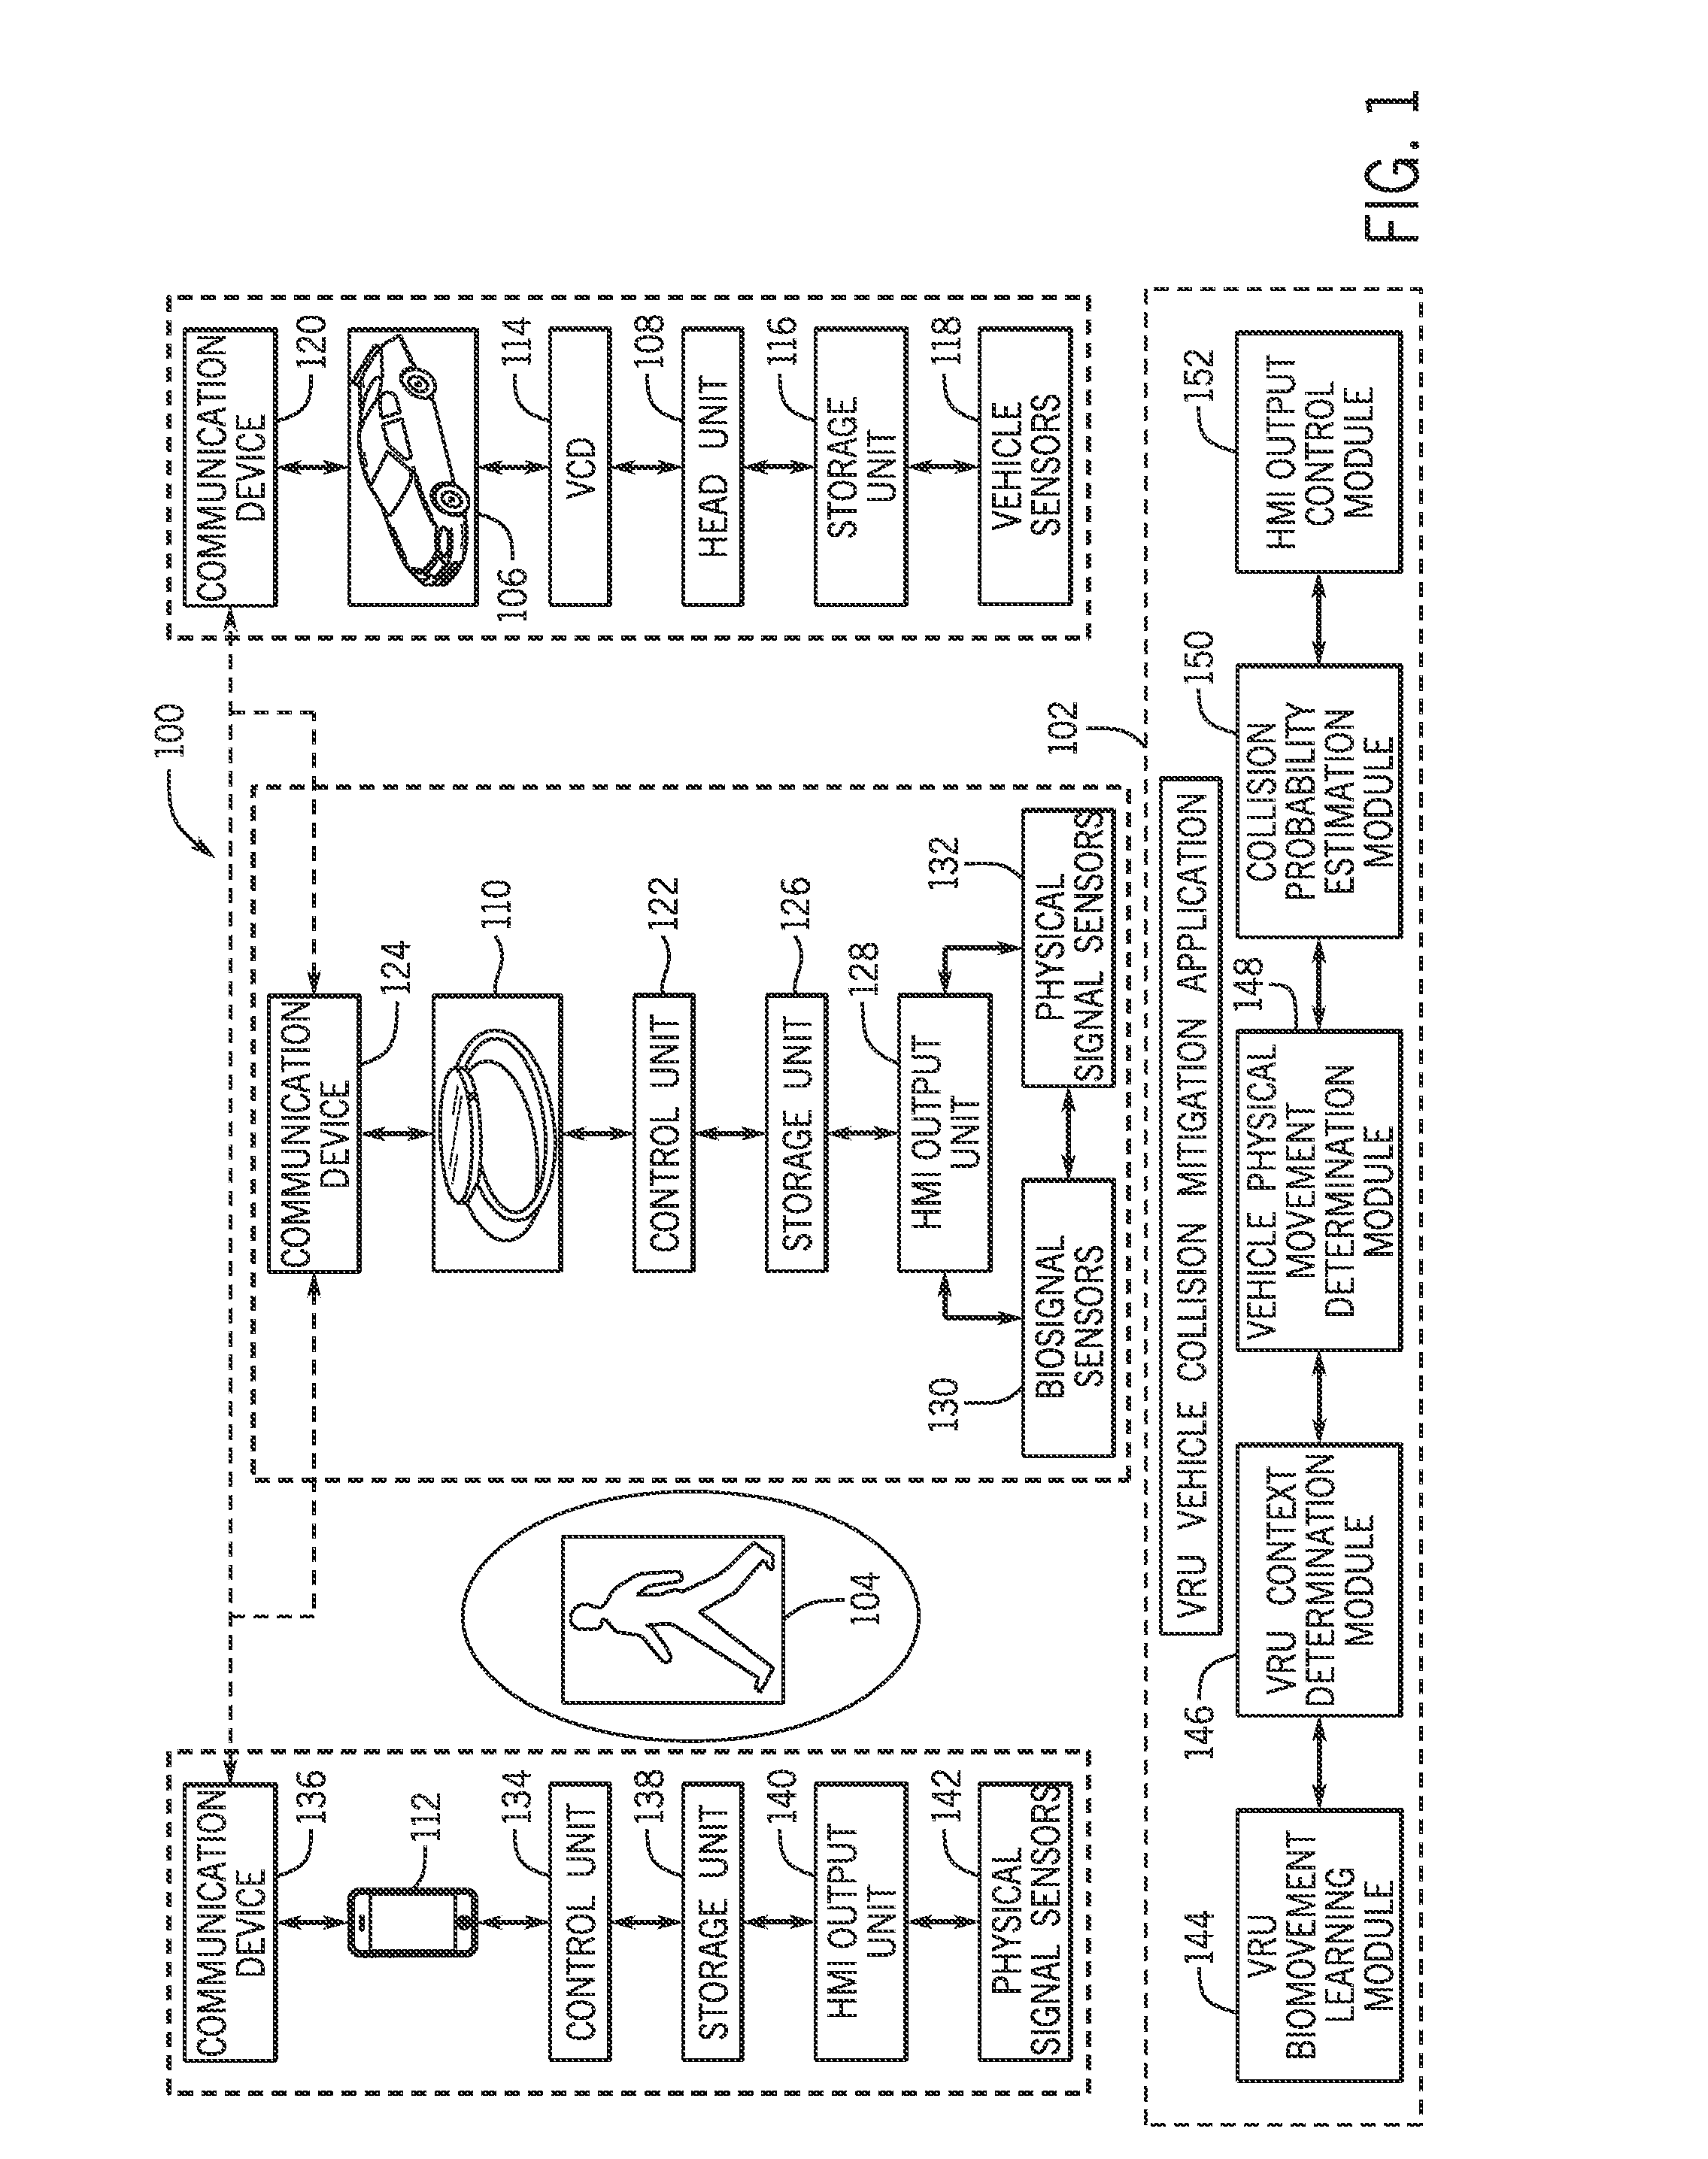 System and method for vehicle collision mitigation with vulnerable road user context sensing